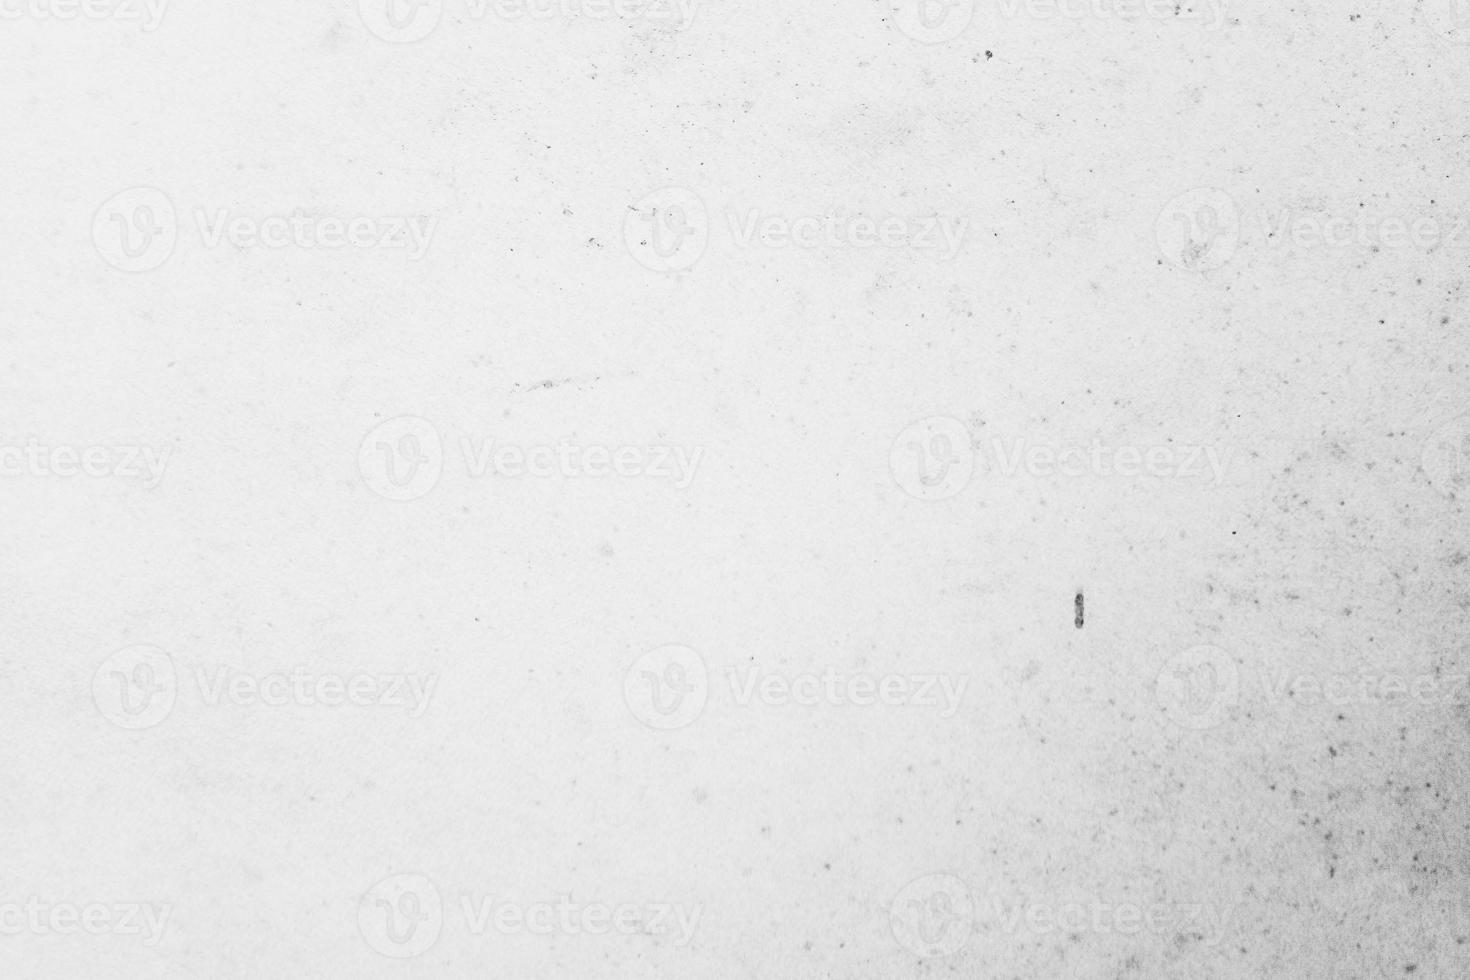 Overlay Distressed Grunge Grime Noise Texture Background photo